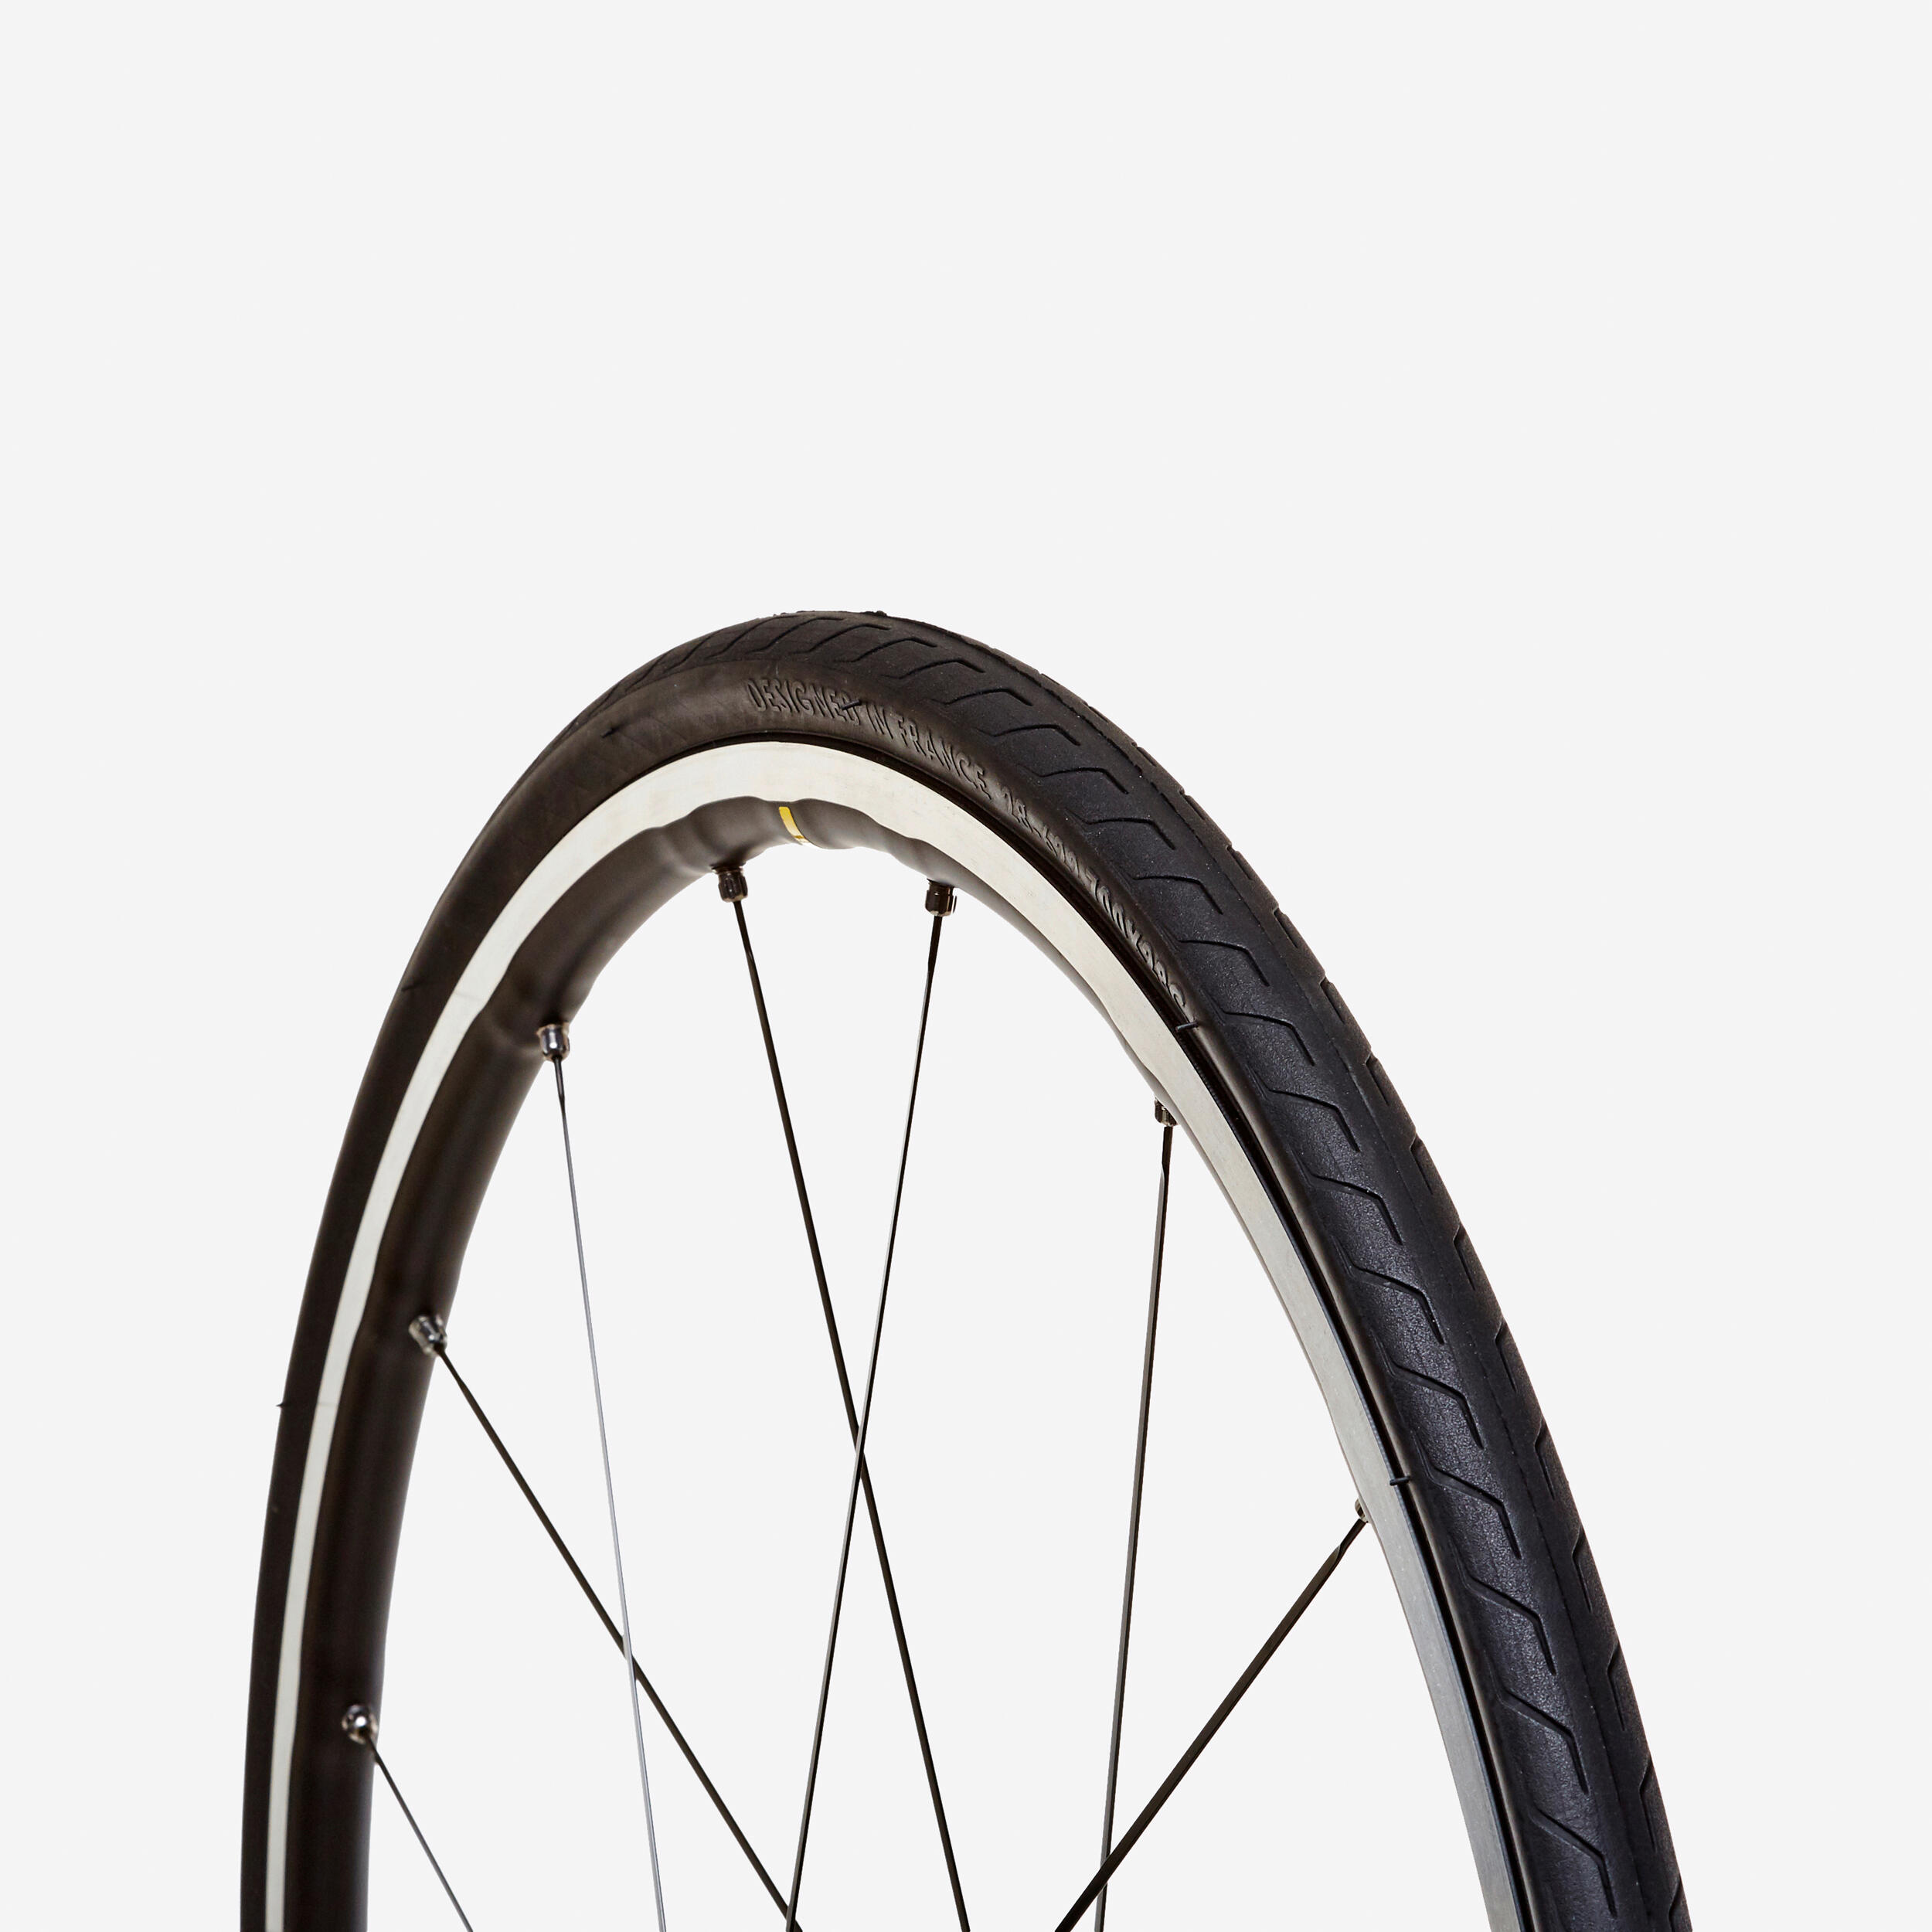 BTWIN Triban Protect Lightweight Road Bike Tyre 700x28